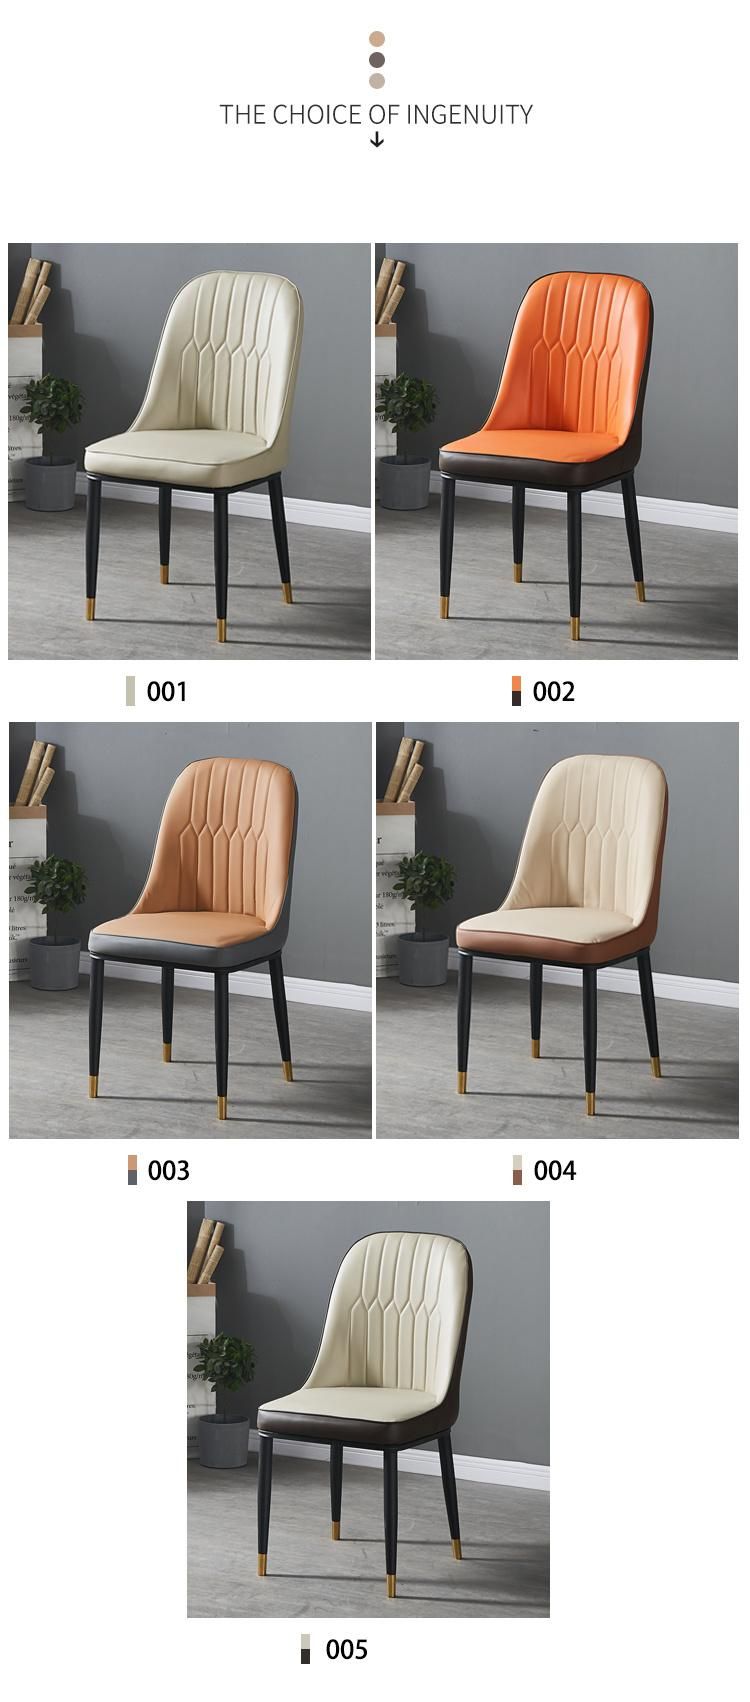 Outdoor Modern Restaurant Home Dinner Furmiture Metal PU Leather Dining Chairs